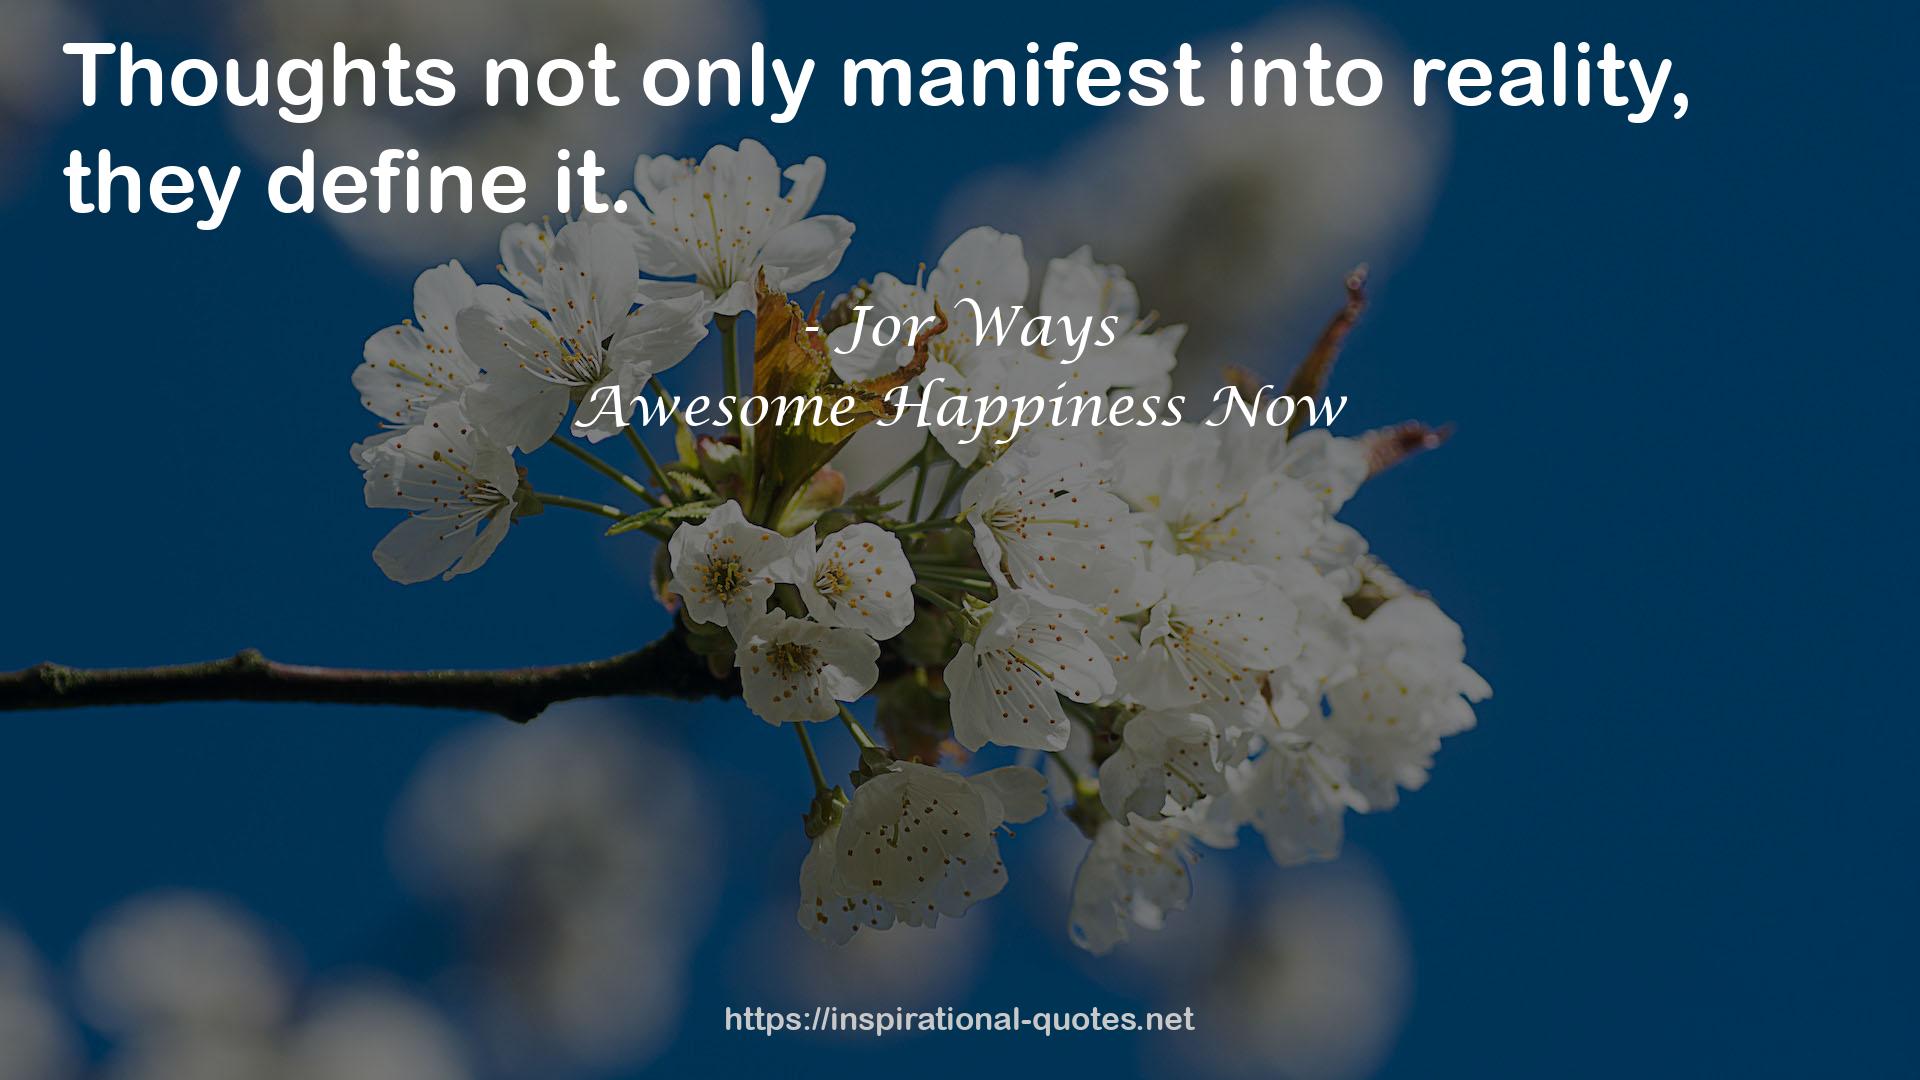 Awesome Happiness Now QUOTES